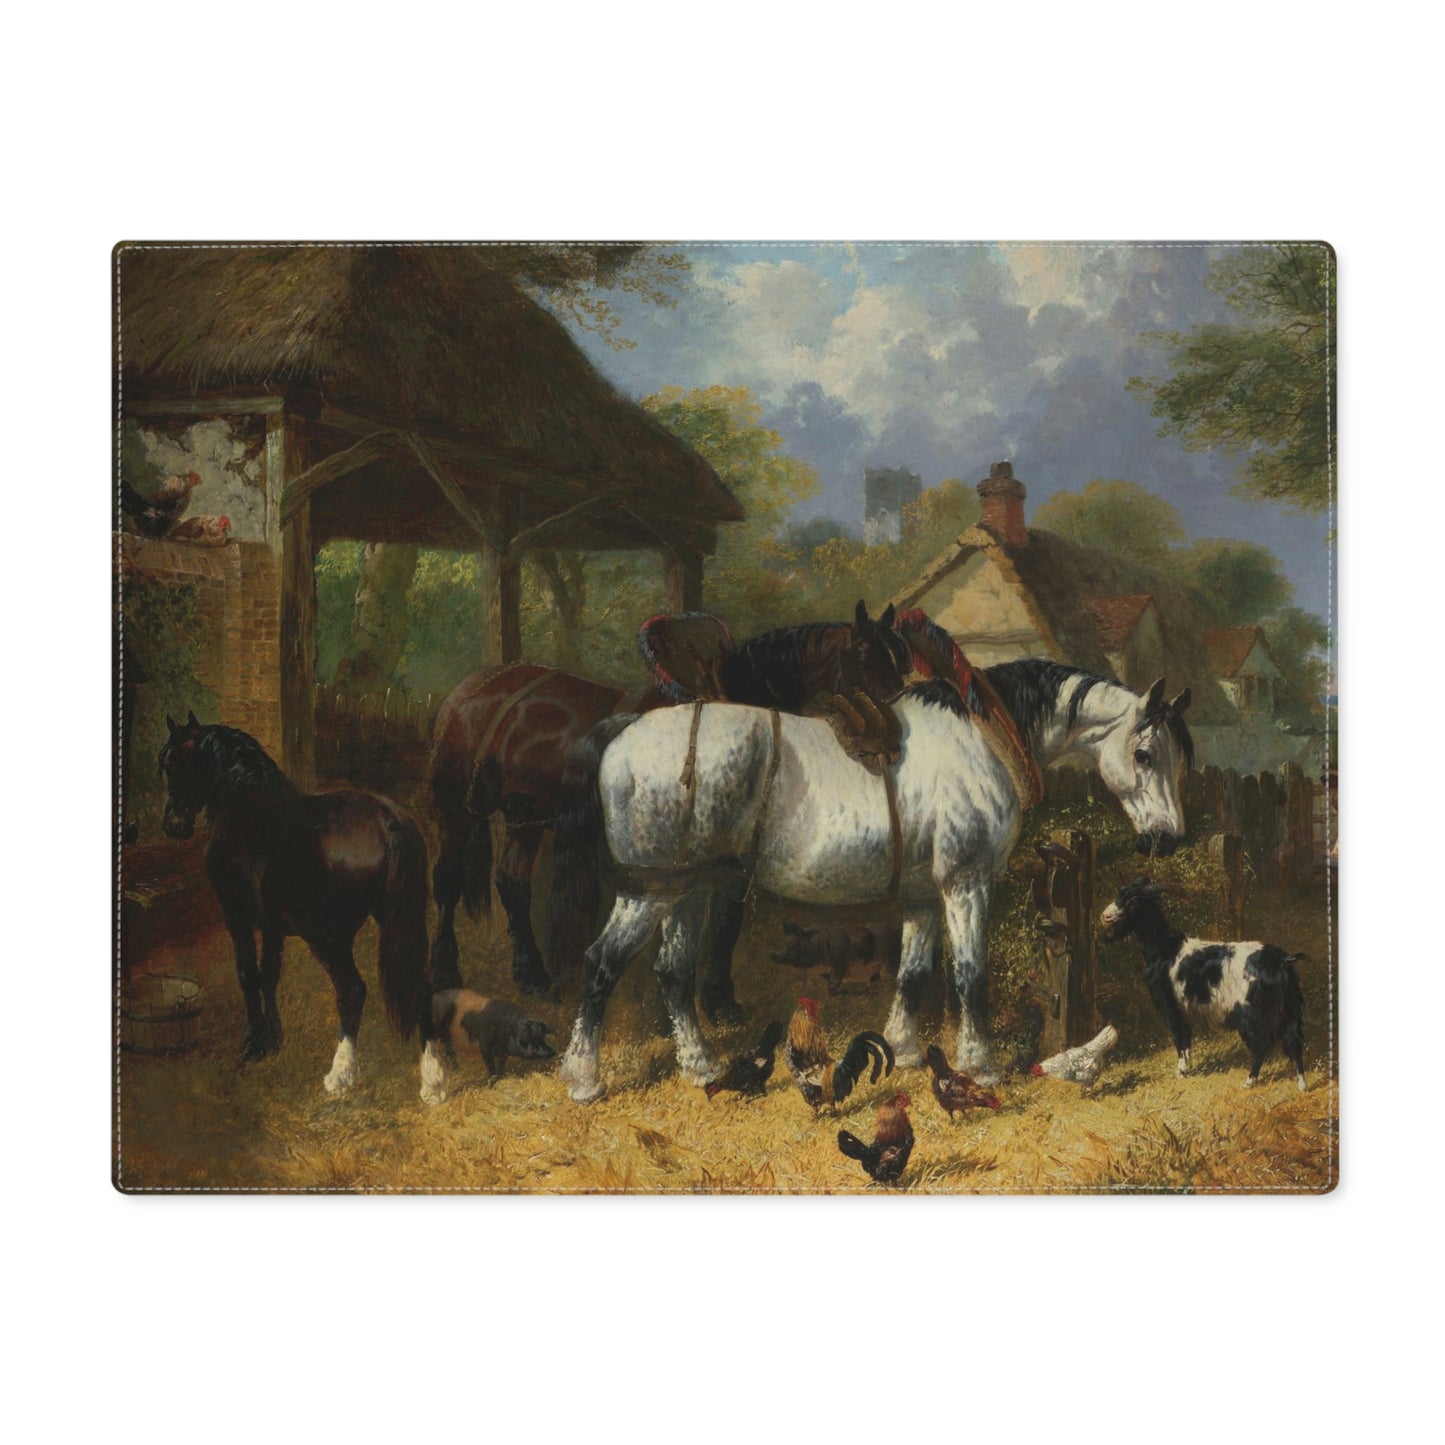 John F. Herring, Jr.: "Horses, Goats, Cows, Pigs, and Poultry in a Farmyard" - Placemat, 1pc